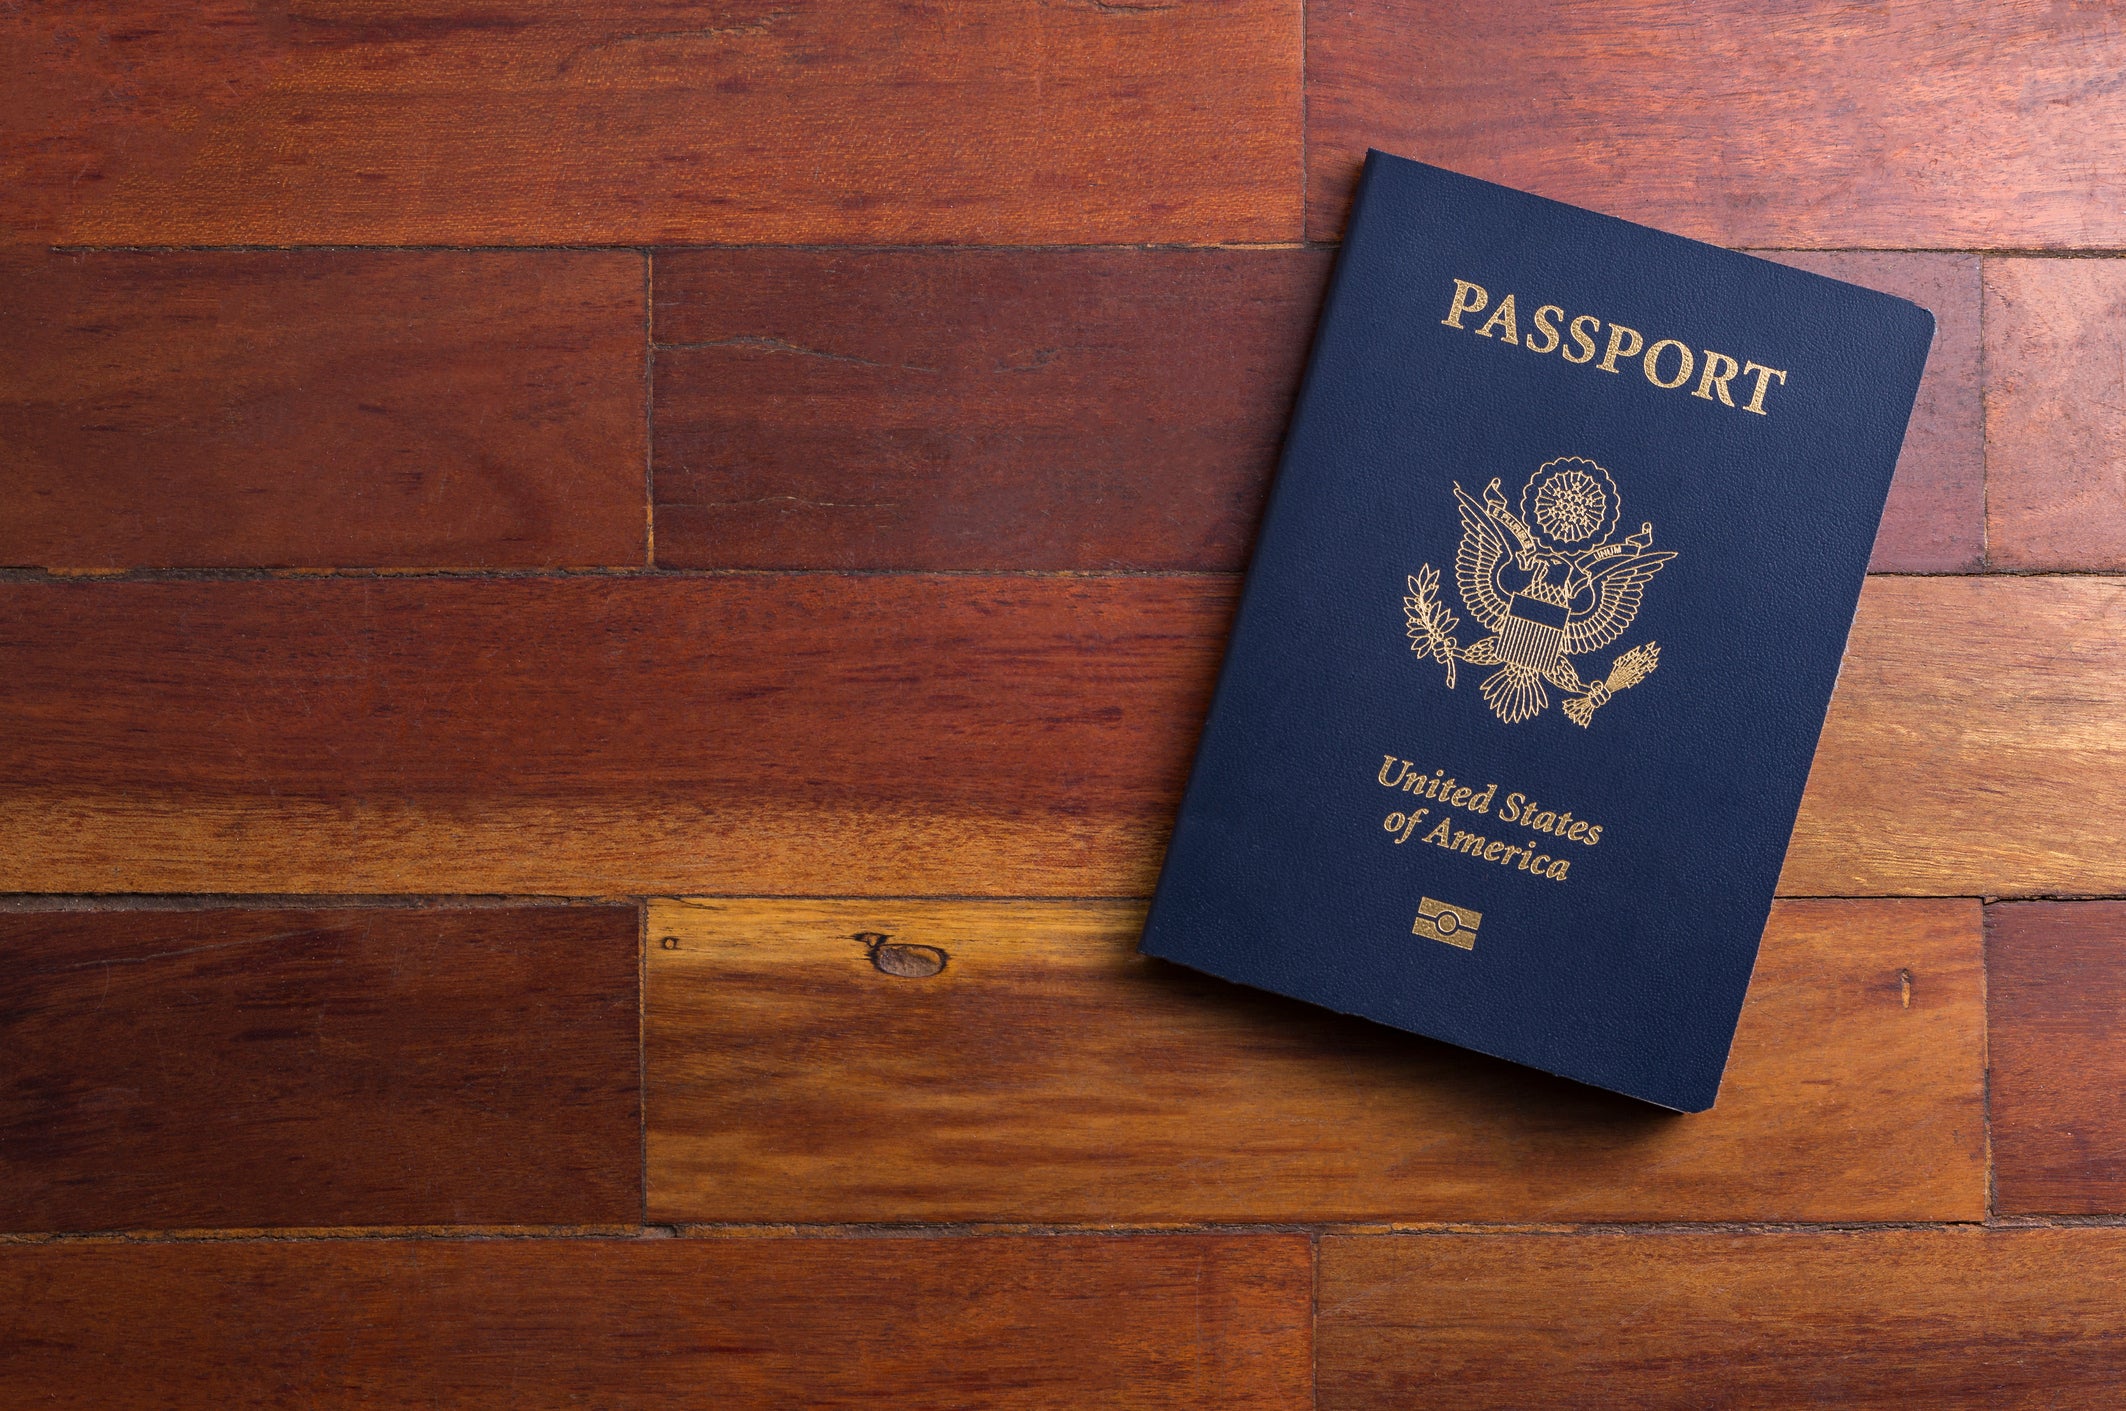 Close-Up Of Passport On Wooden Table